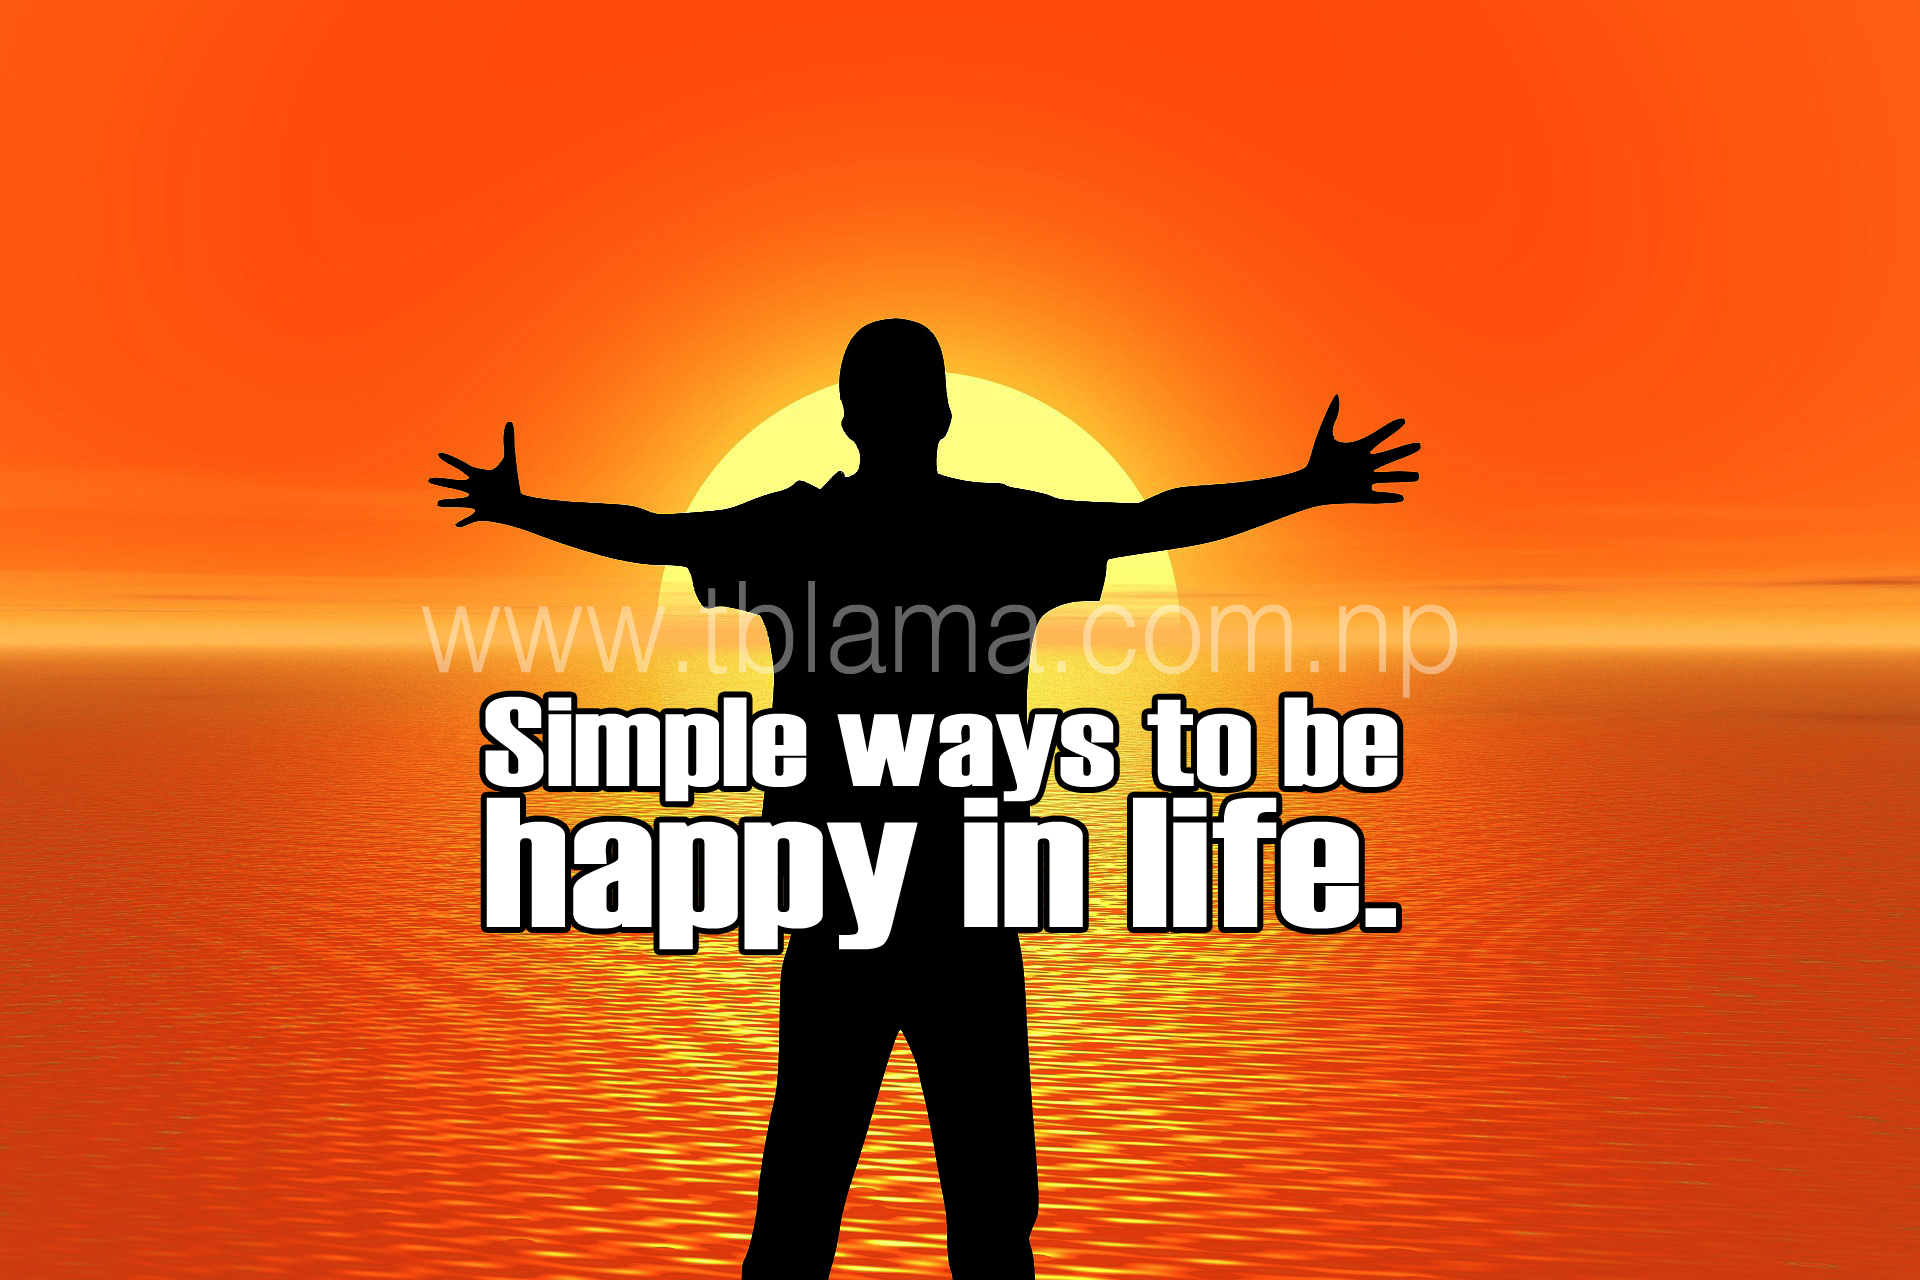 Simple ways to be happy in life.